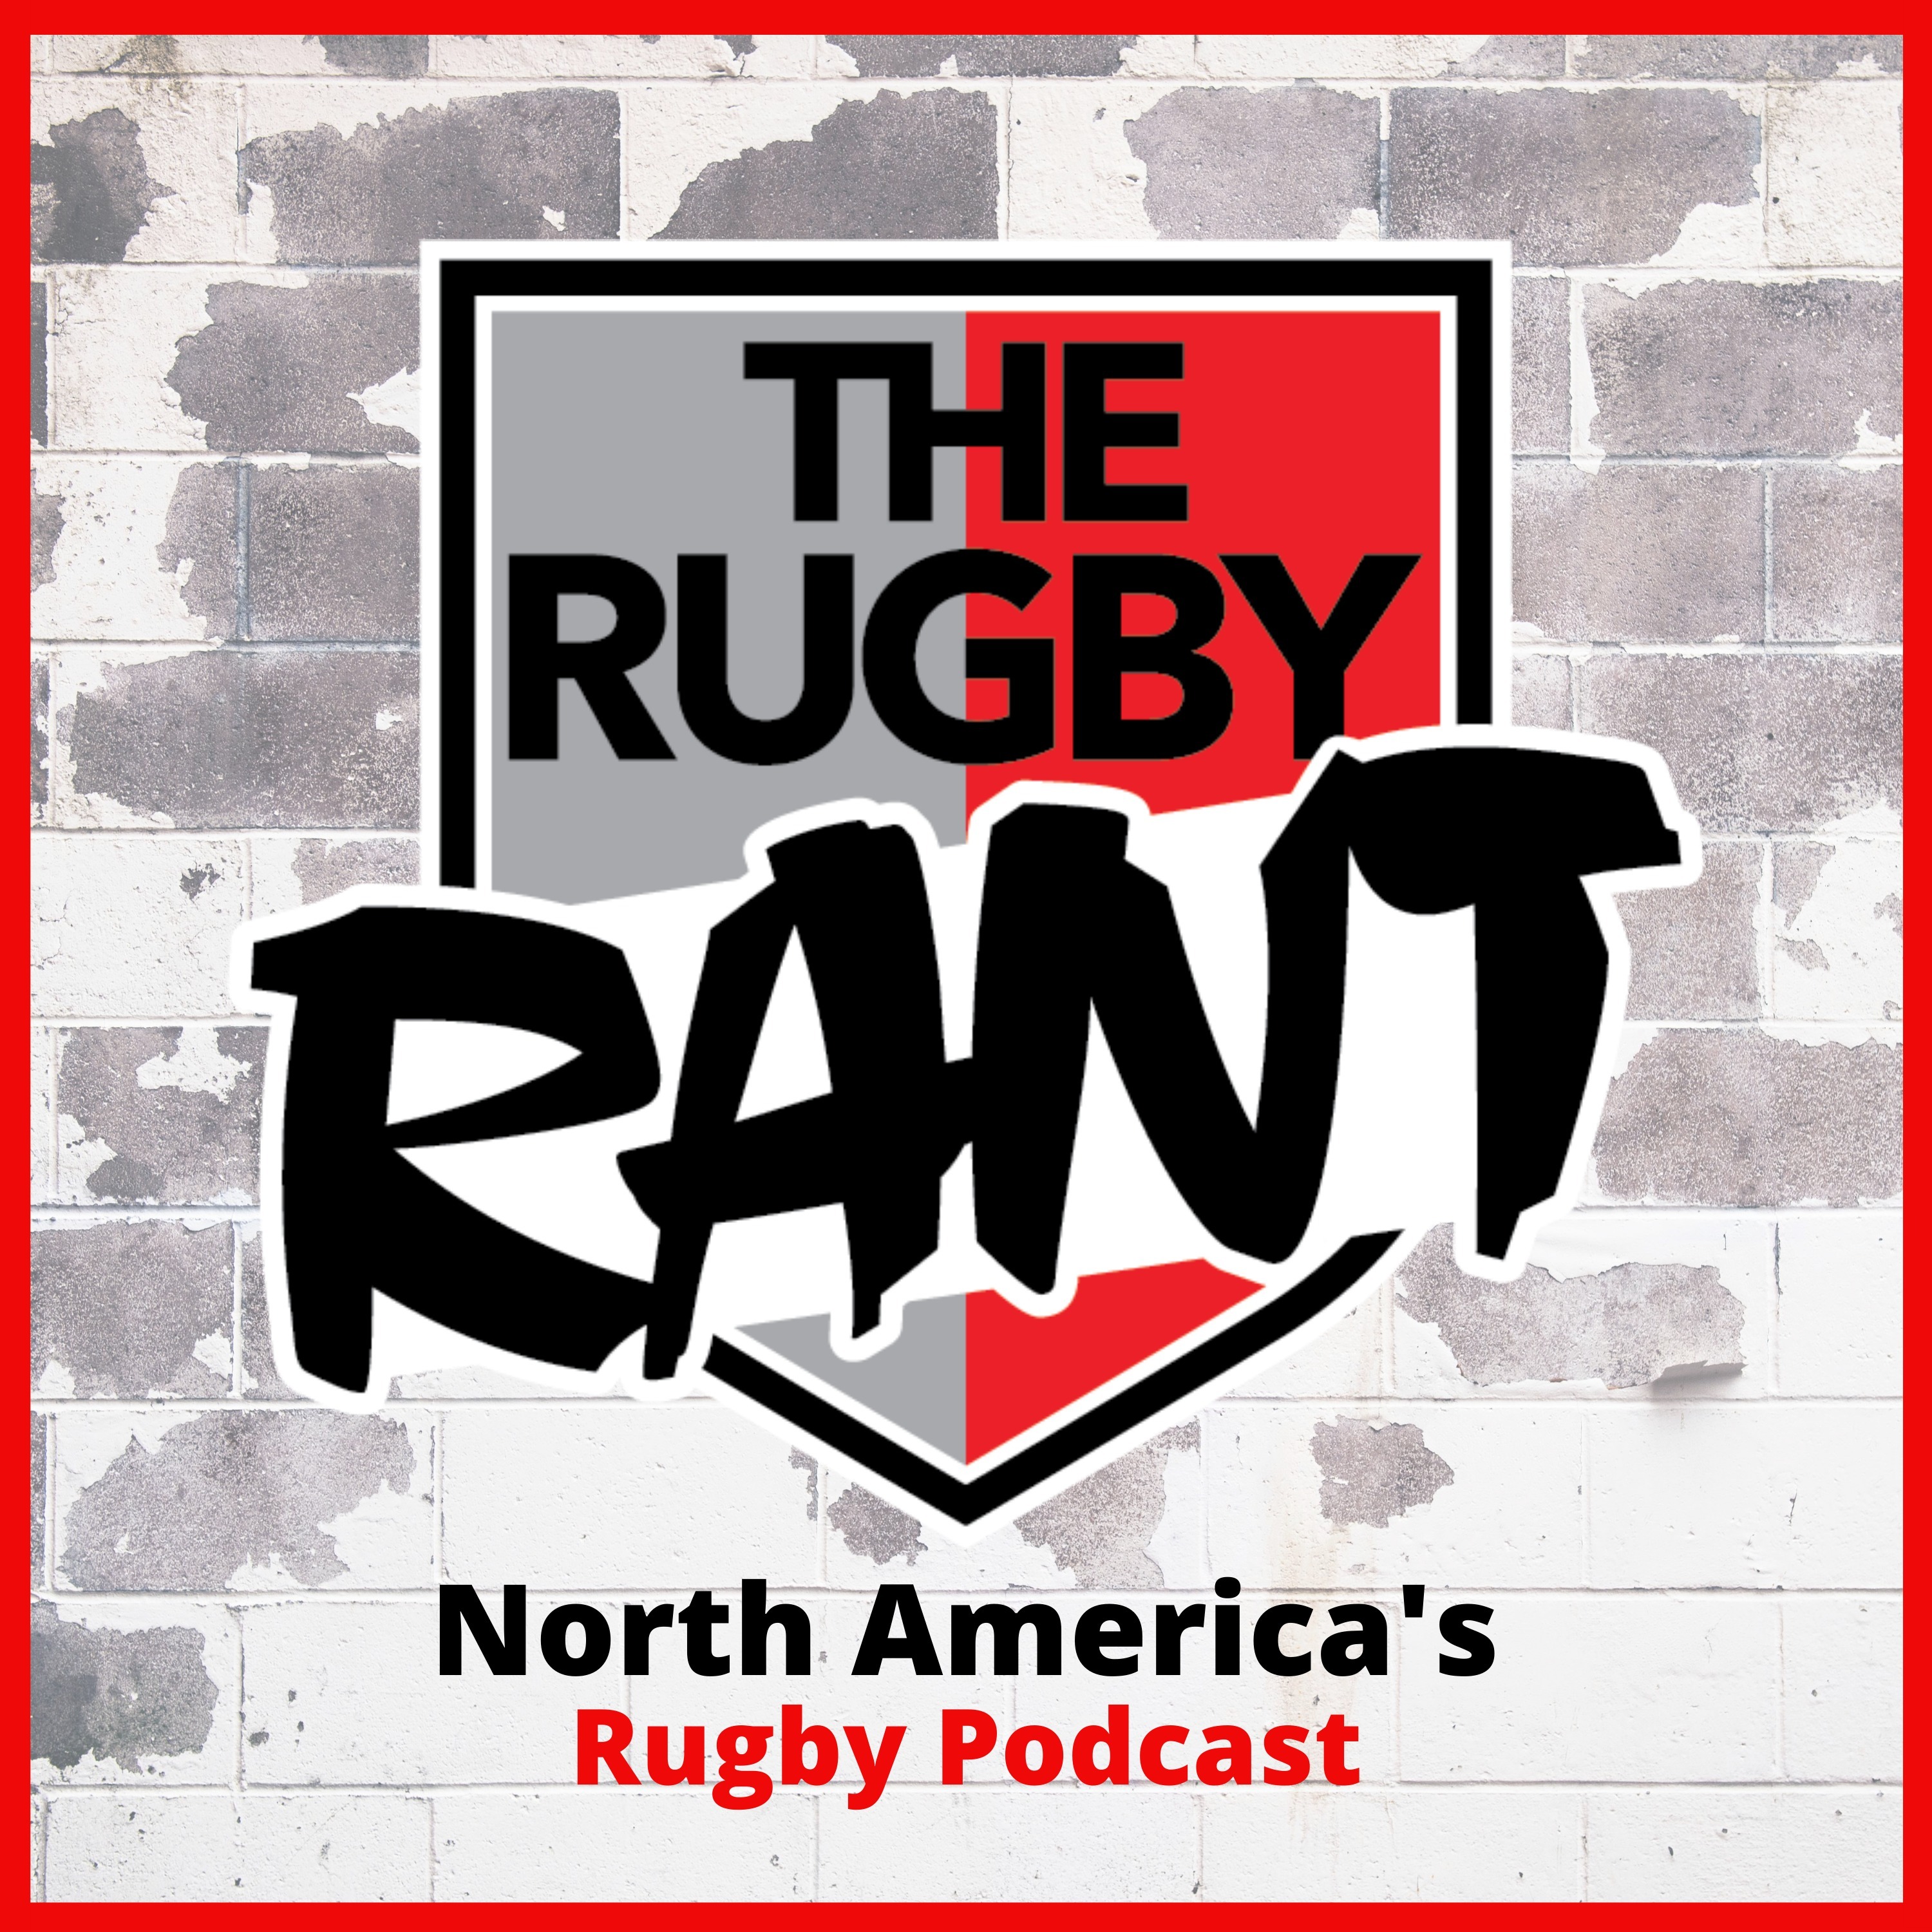 The Rugby Rant - Run, Pass or Kick with Dan Hollinshead